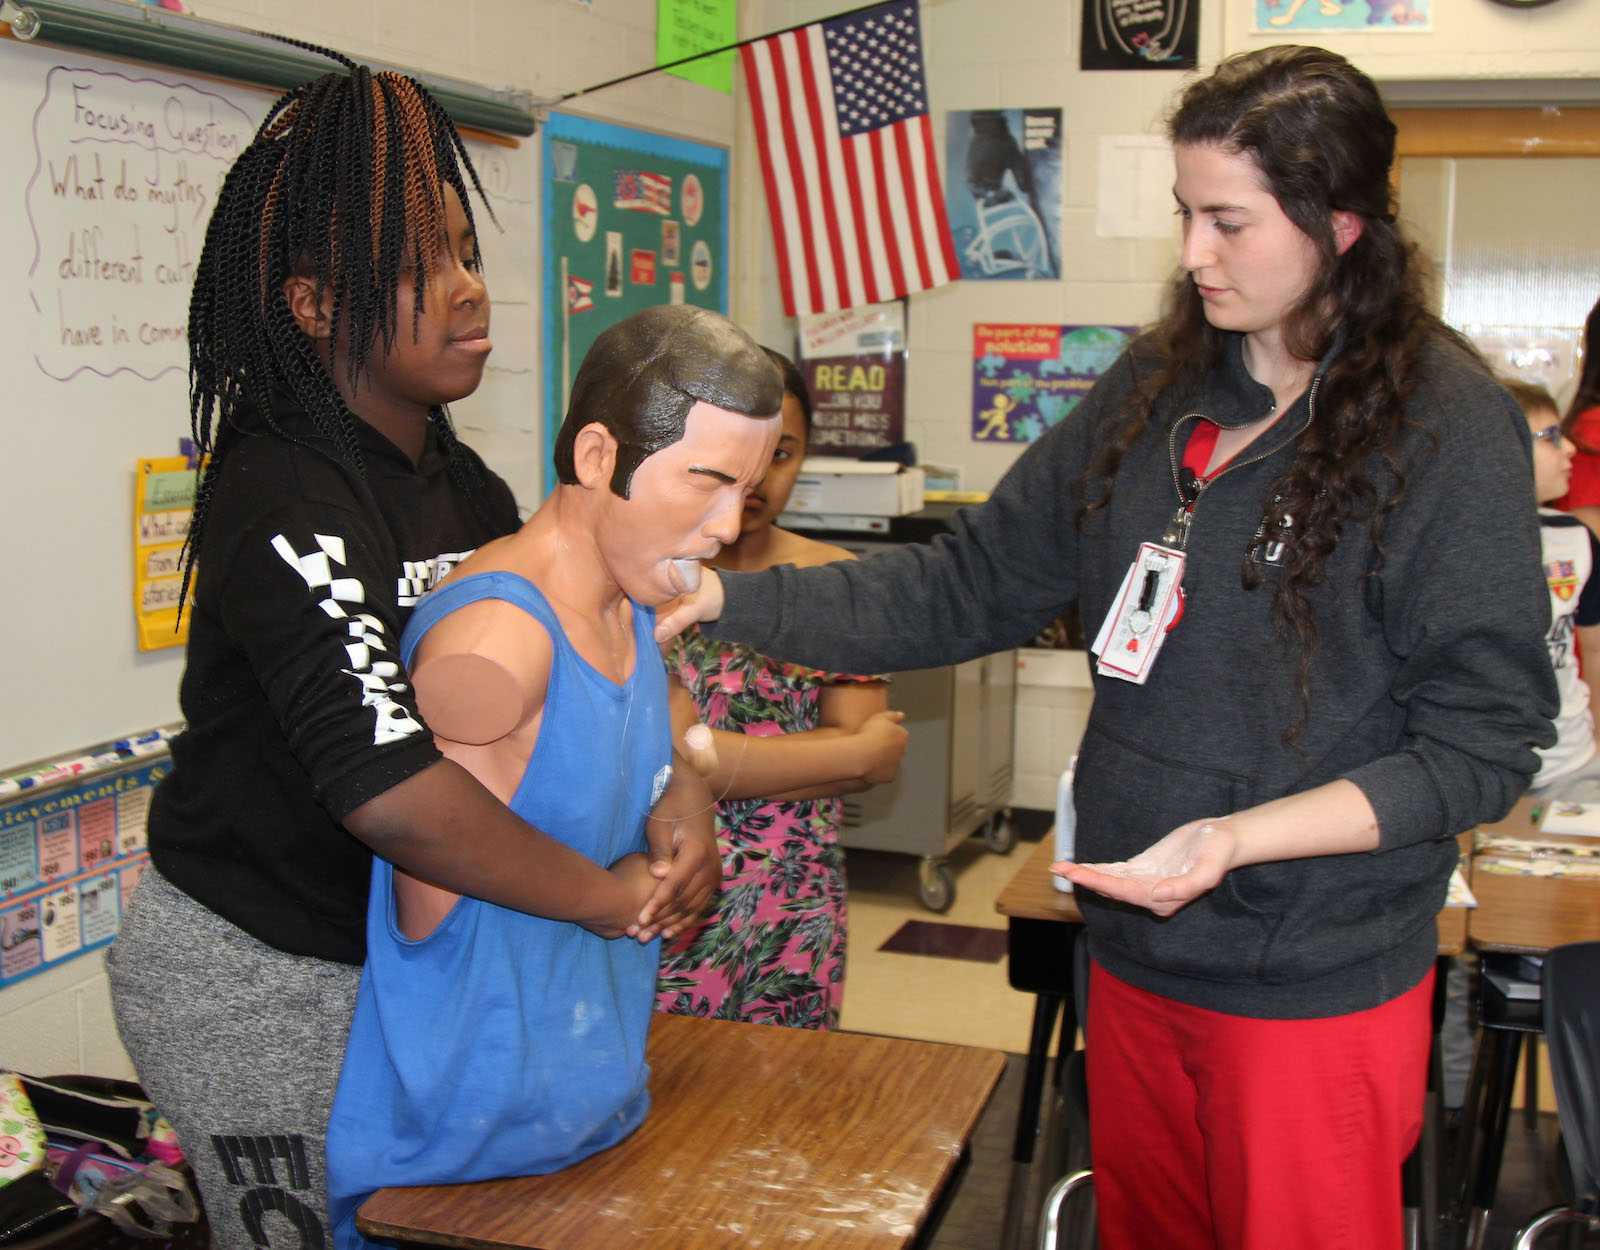 health services staff person teaching students first aid